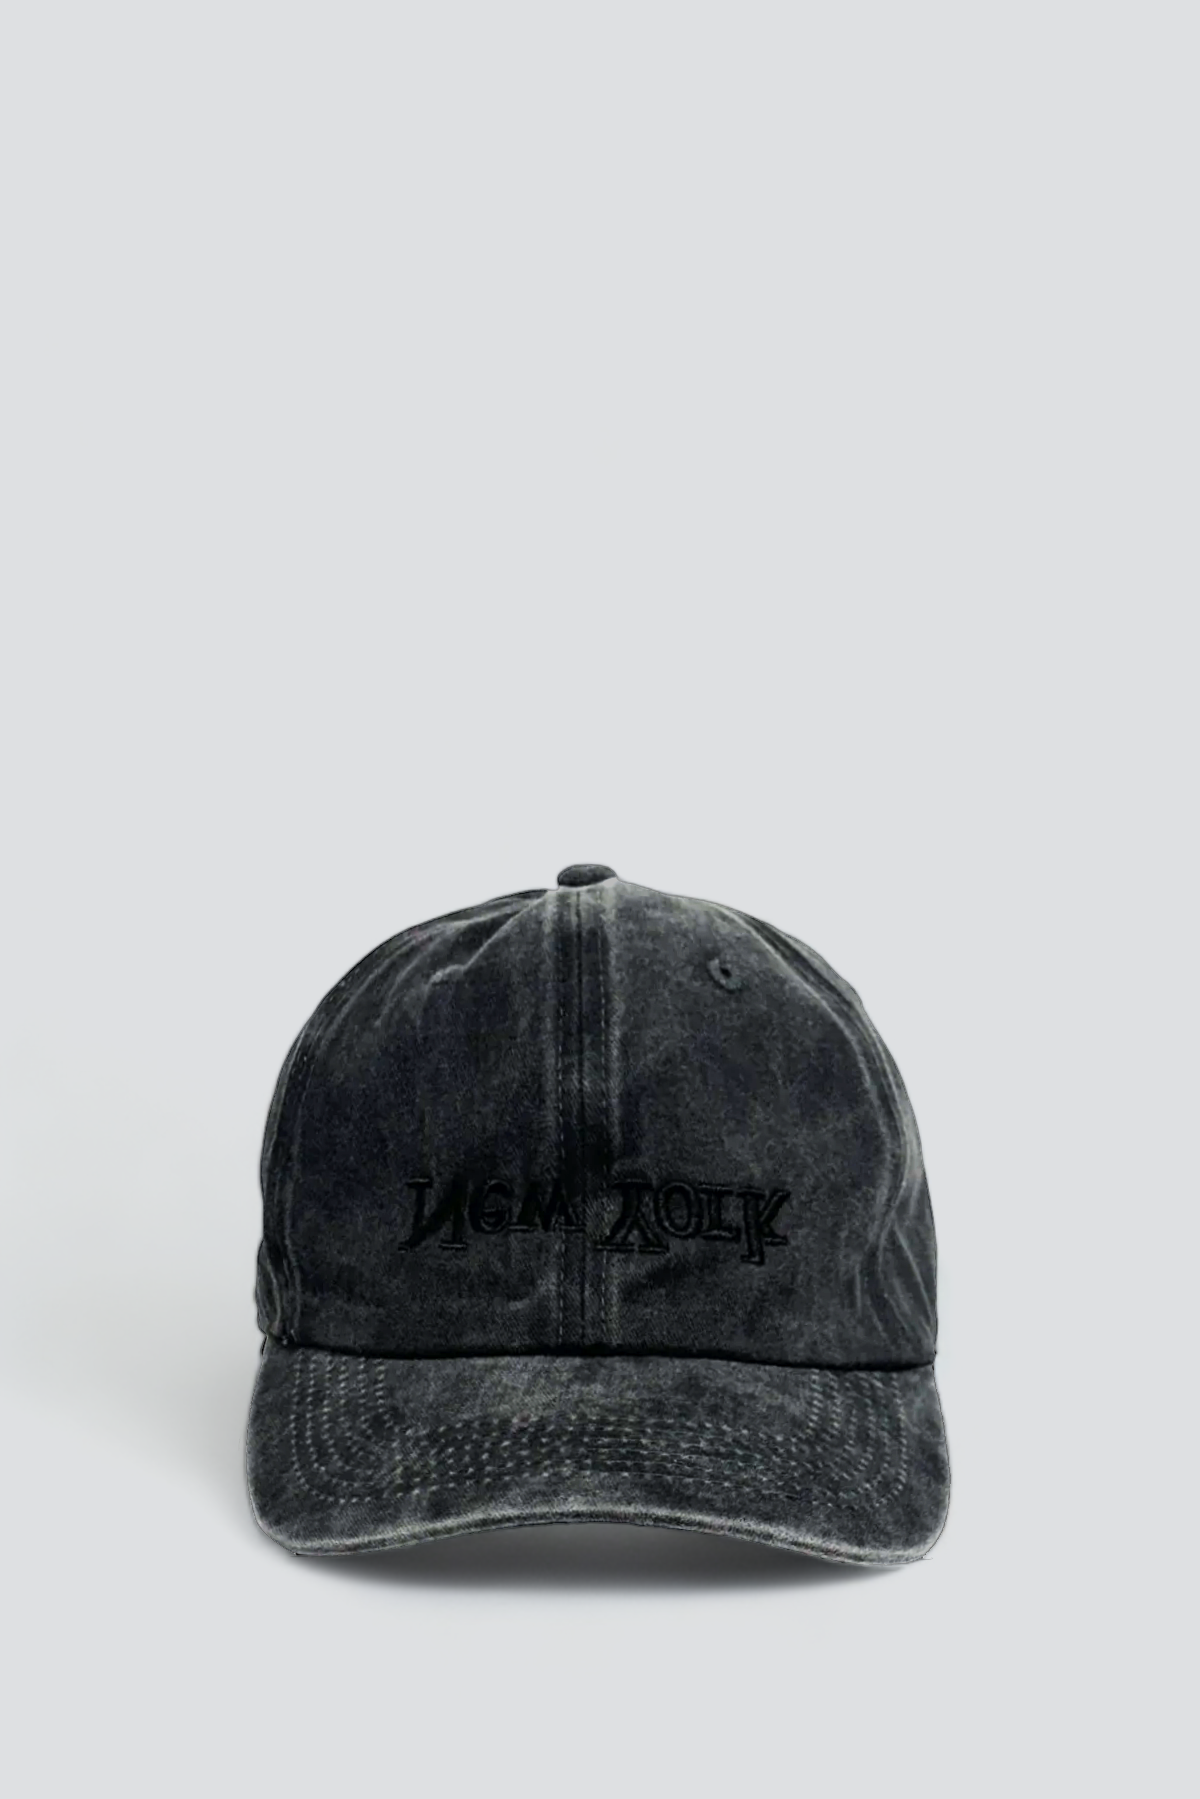 New York Embroidered Hat - Washed Black